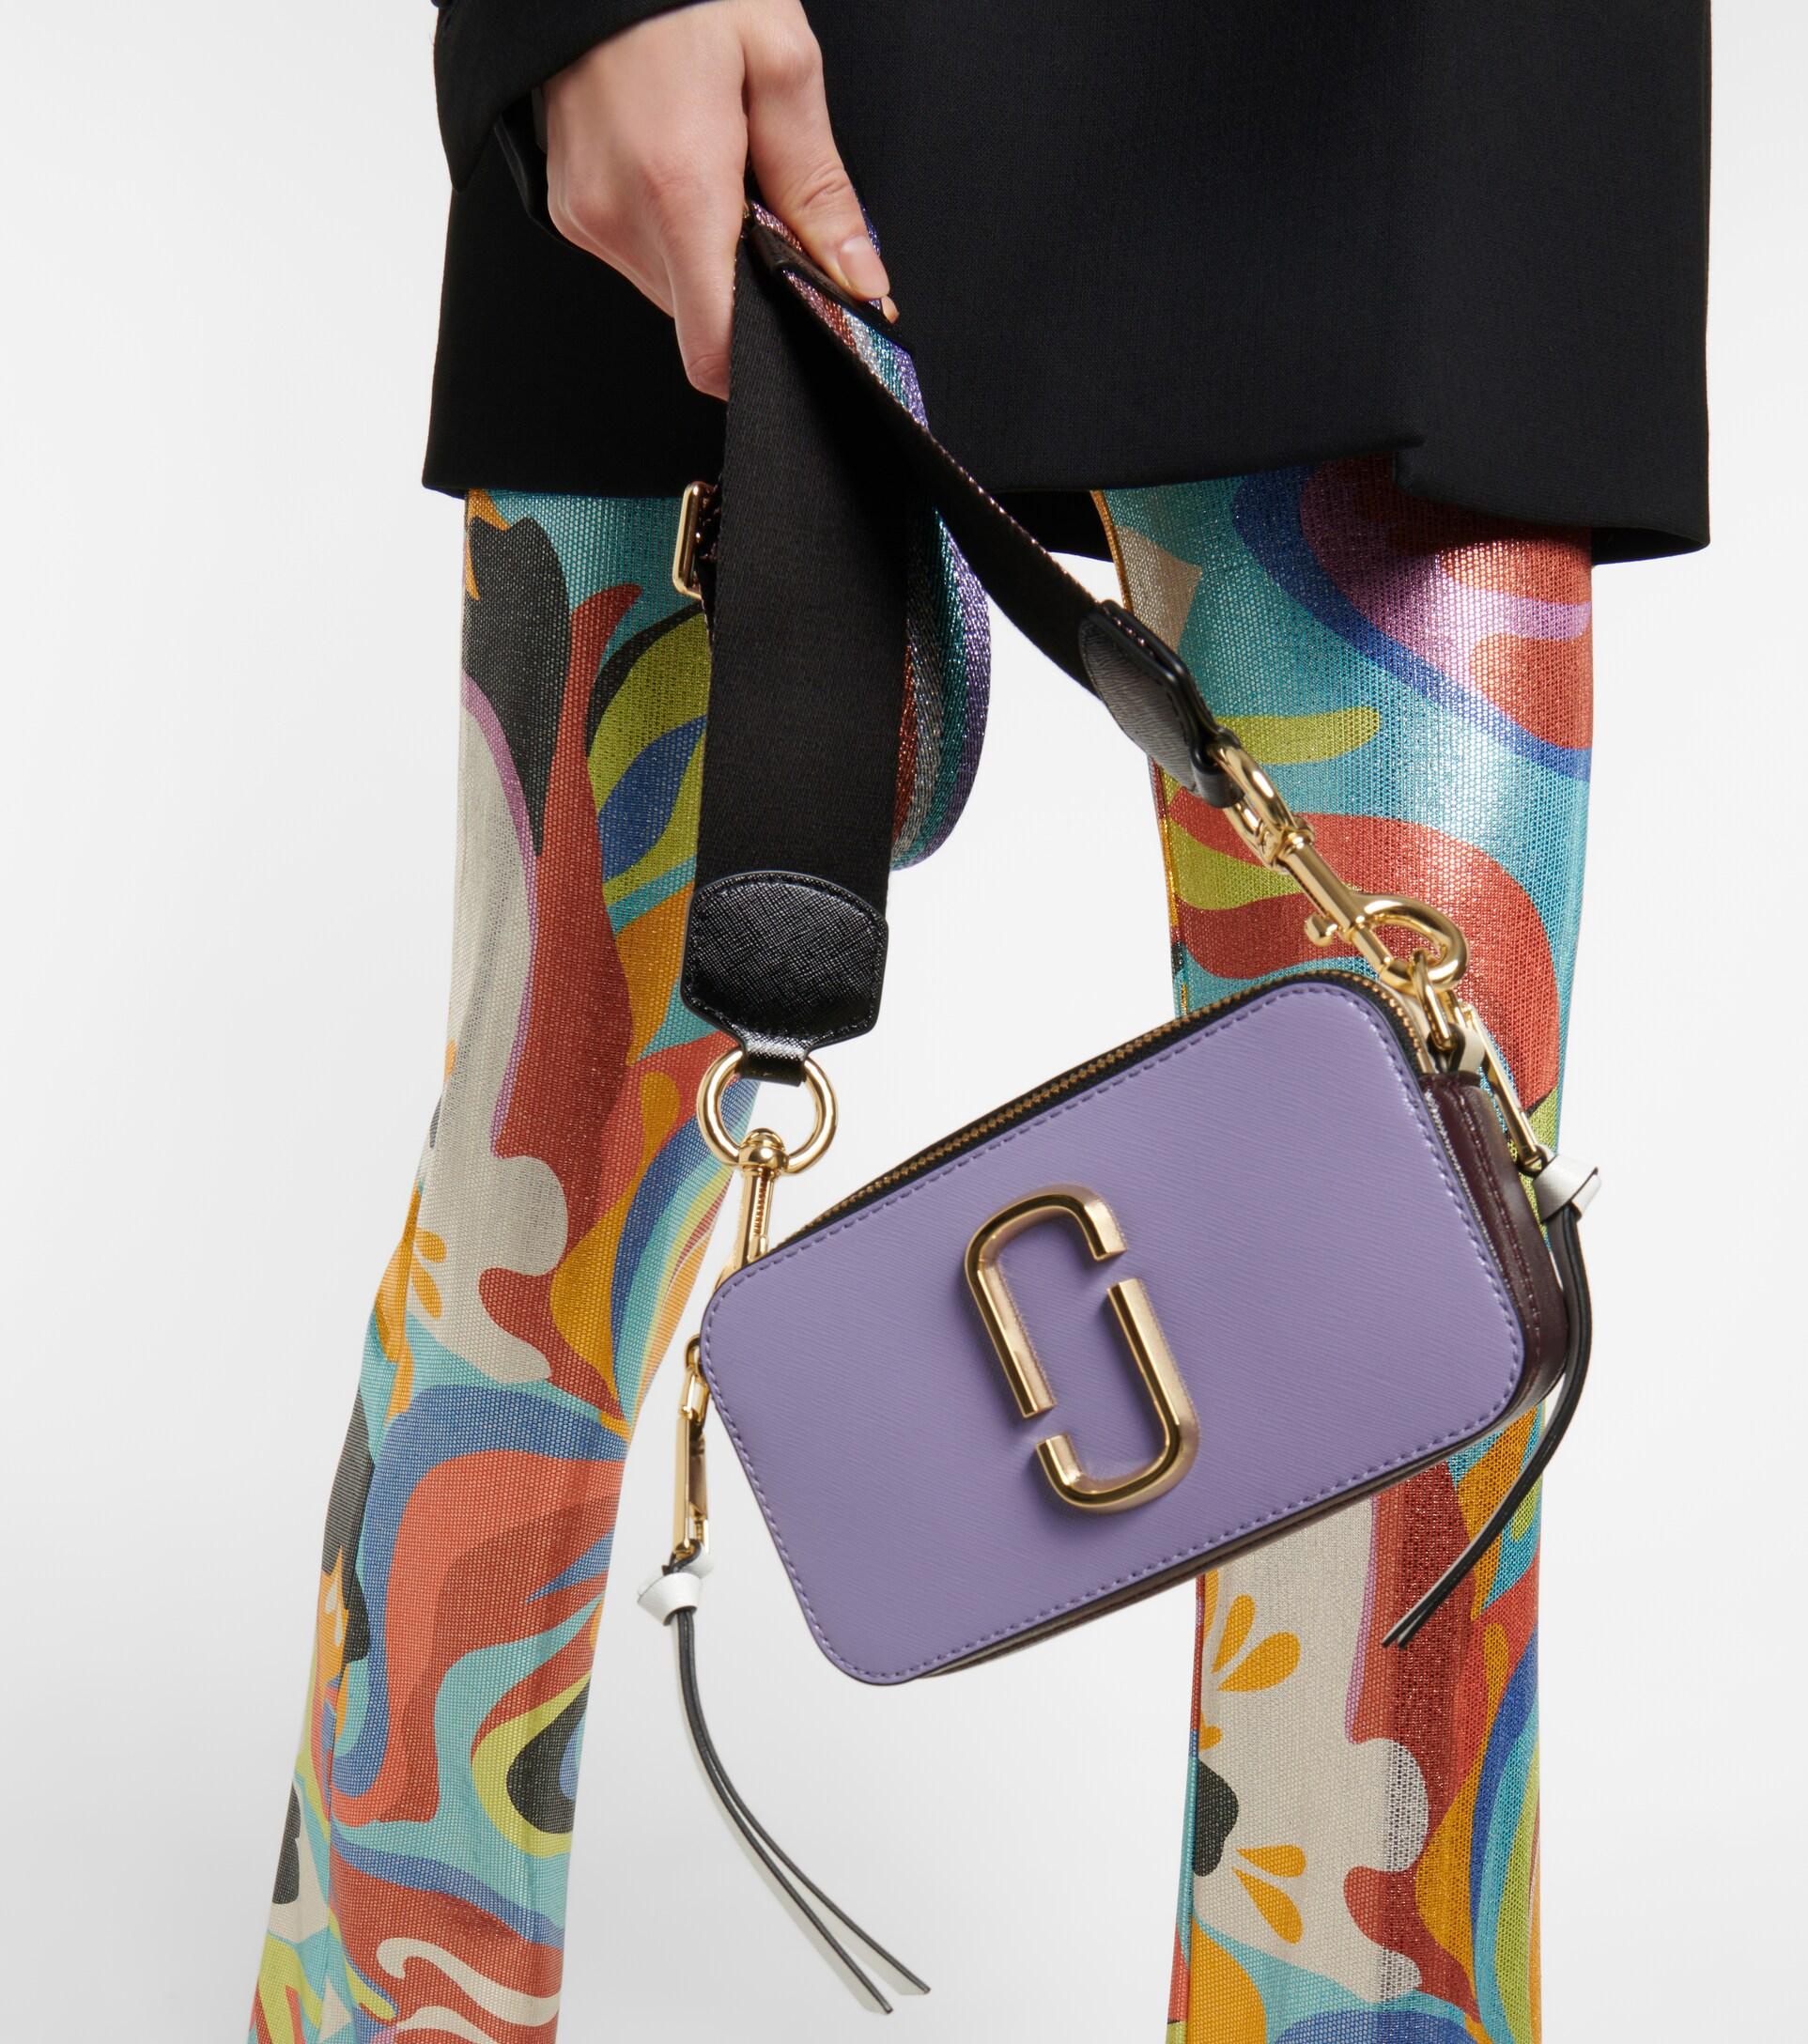 Sell Marc Jacobs Stamped Floral Snapshot Crossbody Bag - Purple